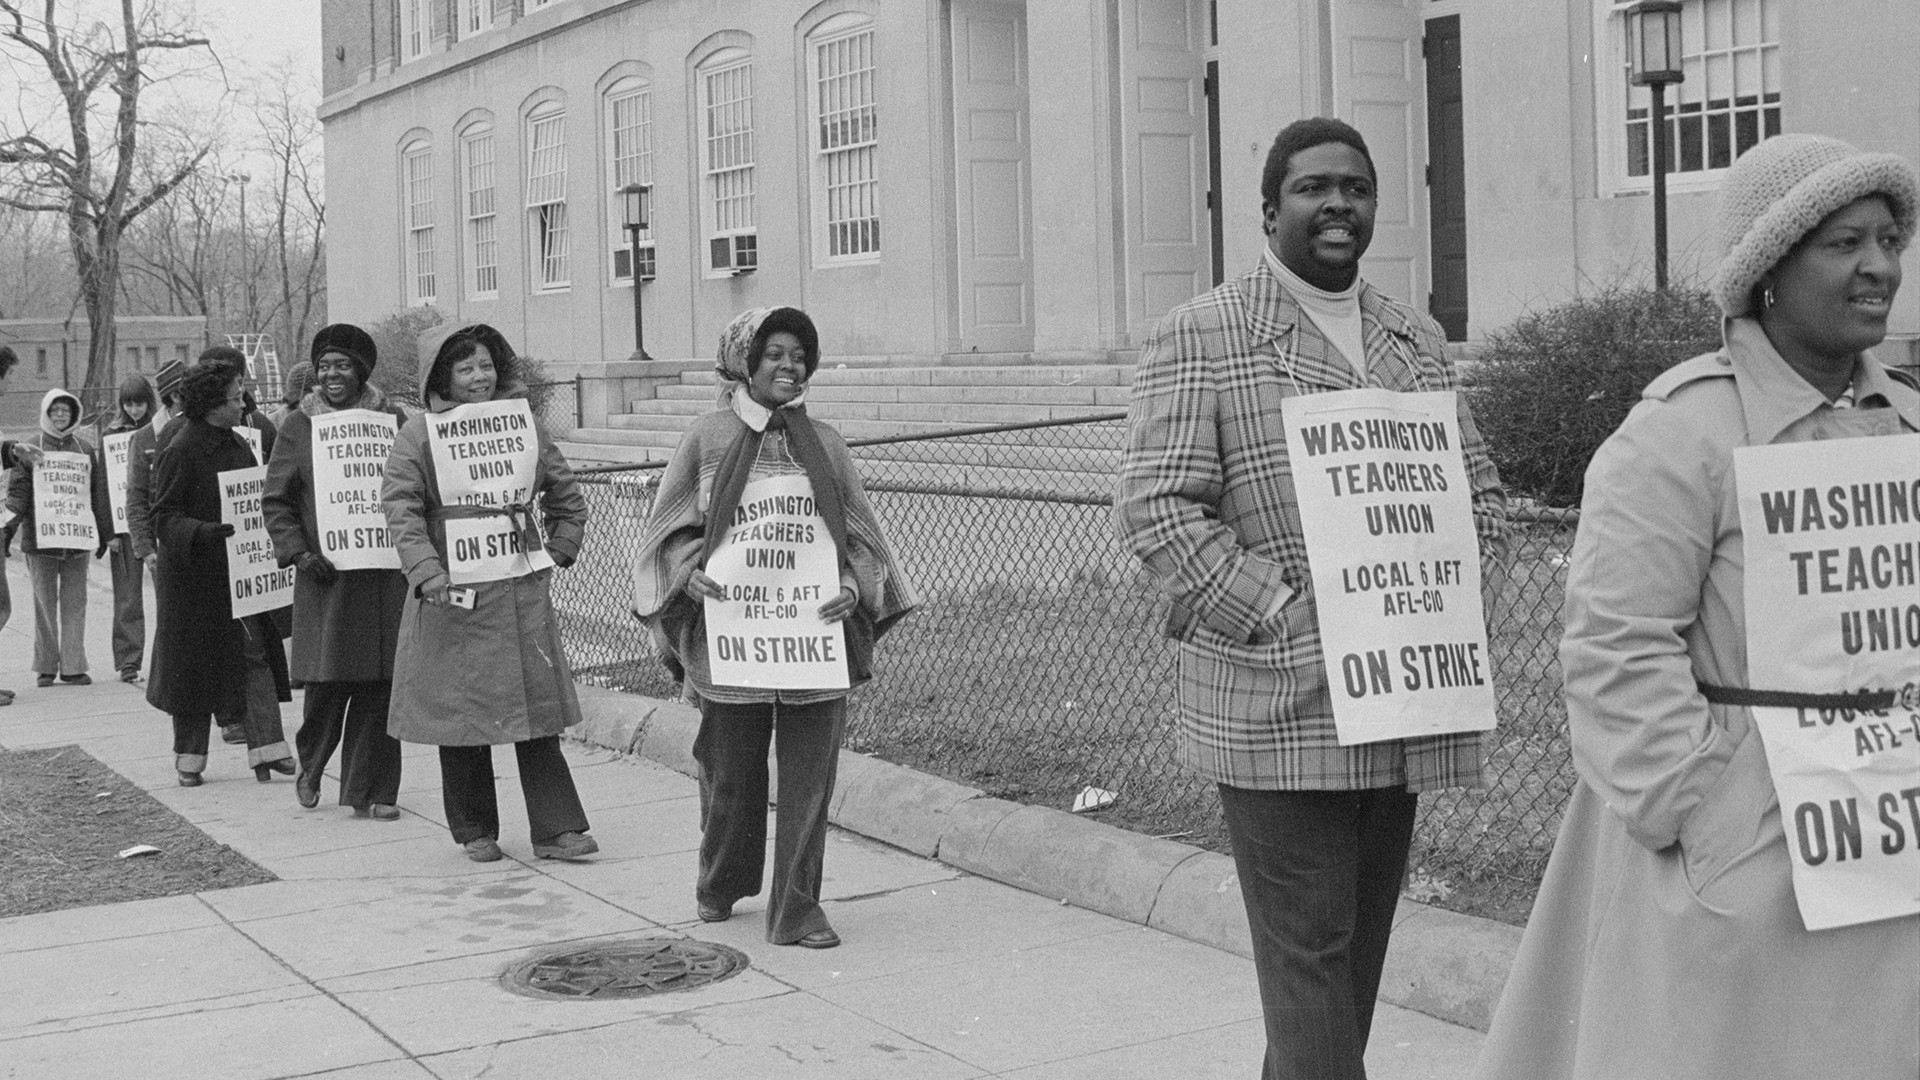 In March 1979, teachers from the Washington Teachers Union, Local 6 American Federation of Teachers, AFL-CIO walked the picket line in Washington, D.C.